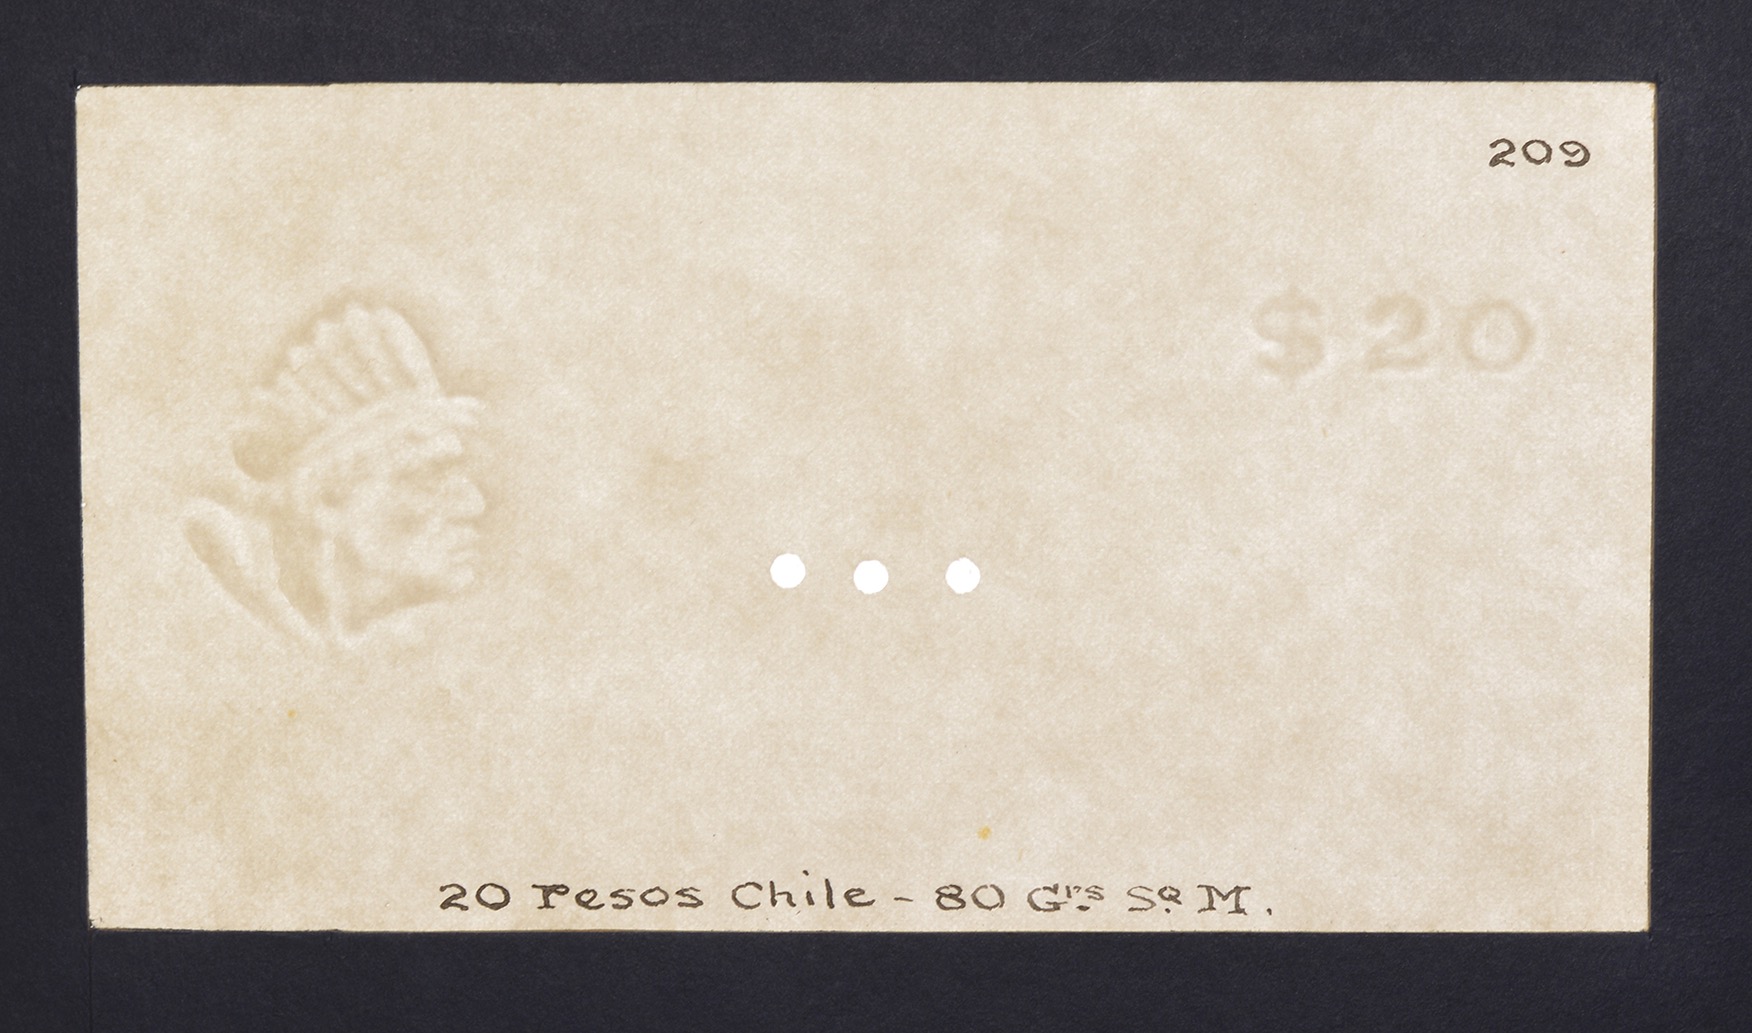 Banco Central de Chile, a complete set of watermarked paper for the 5, 10, 20, 50, 100,... - Image 6 of 9